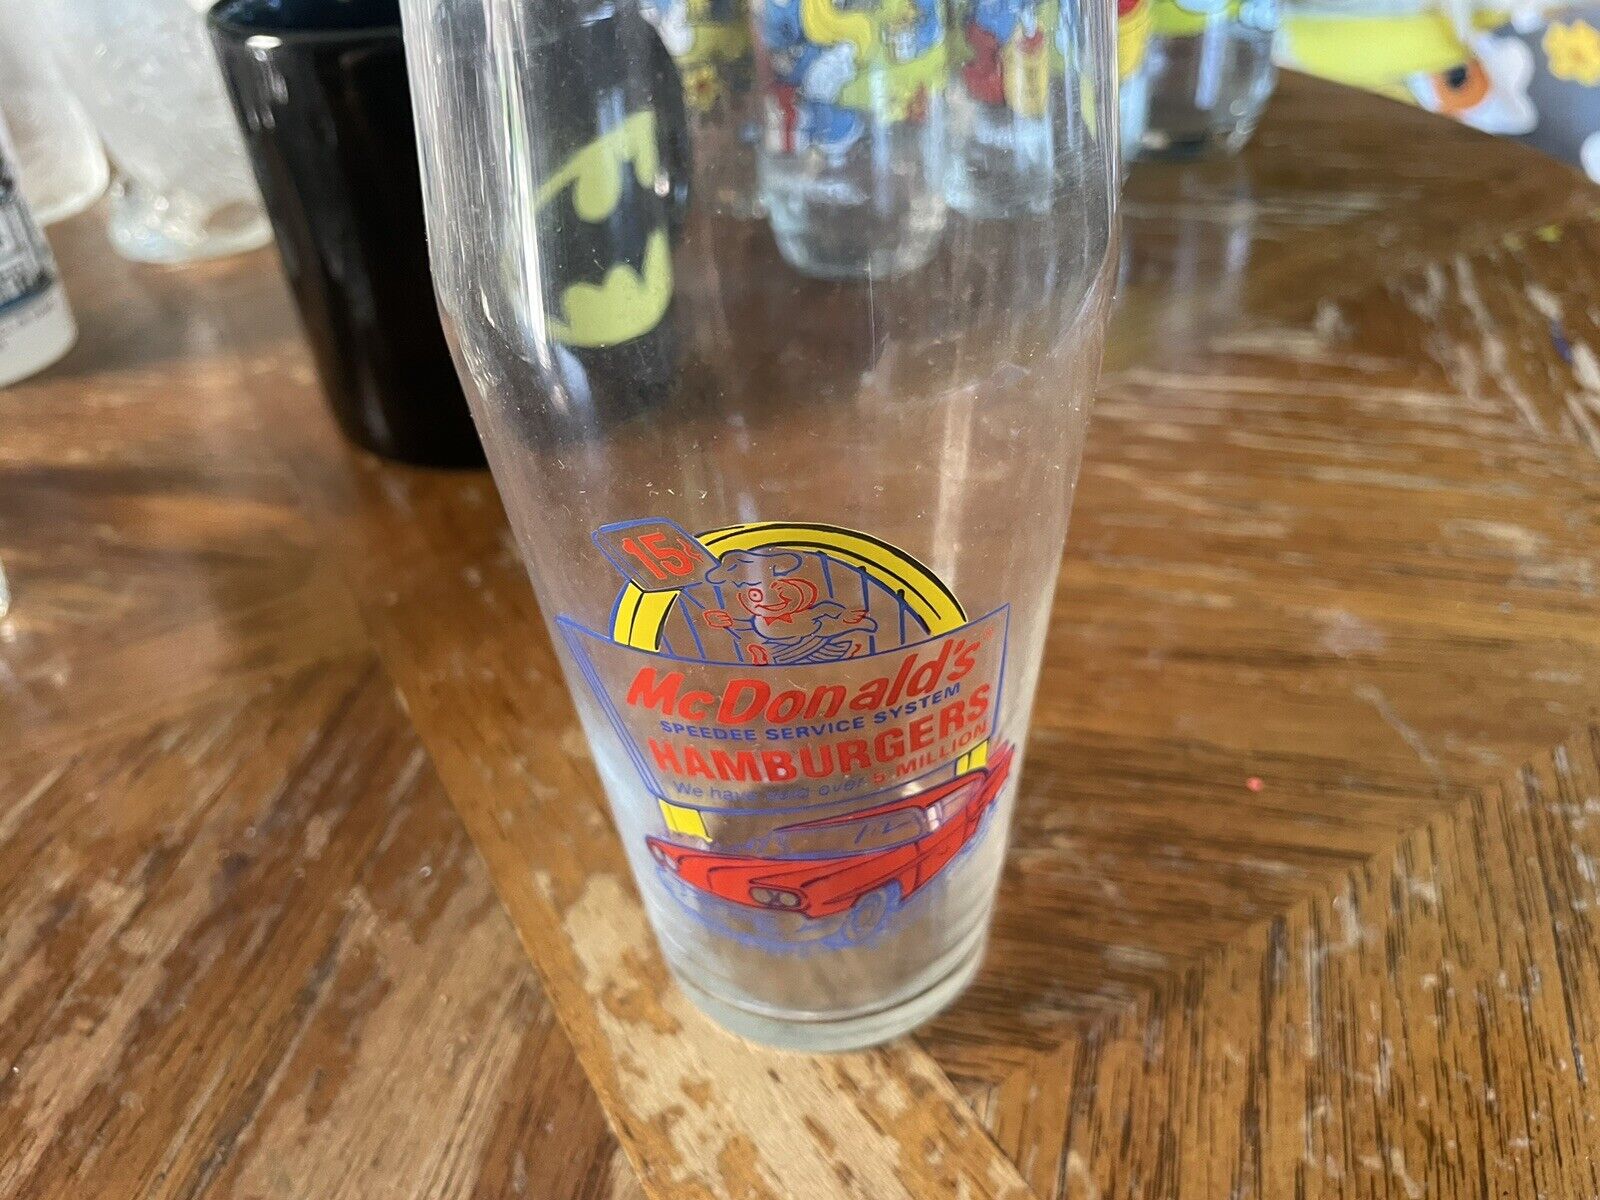 1992 Mc Donald’s Vintage Advertising Glass Cup